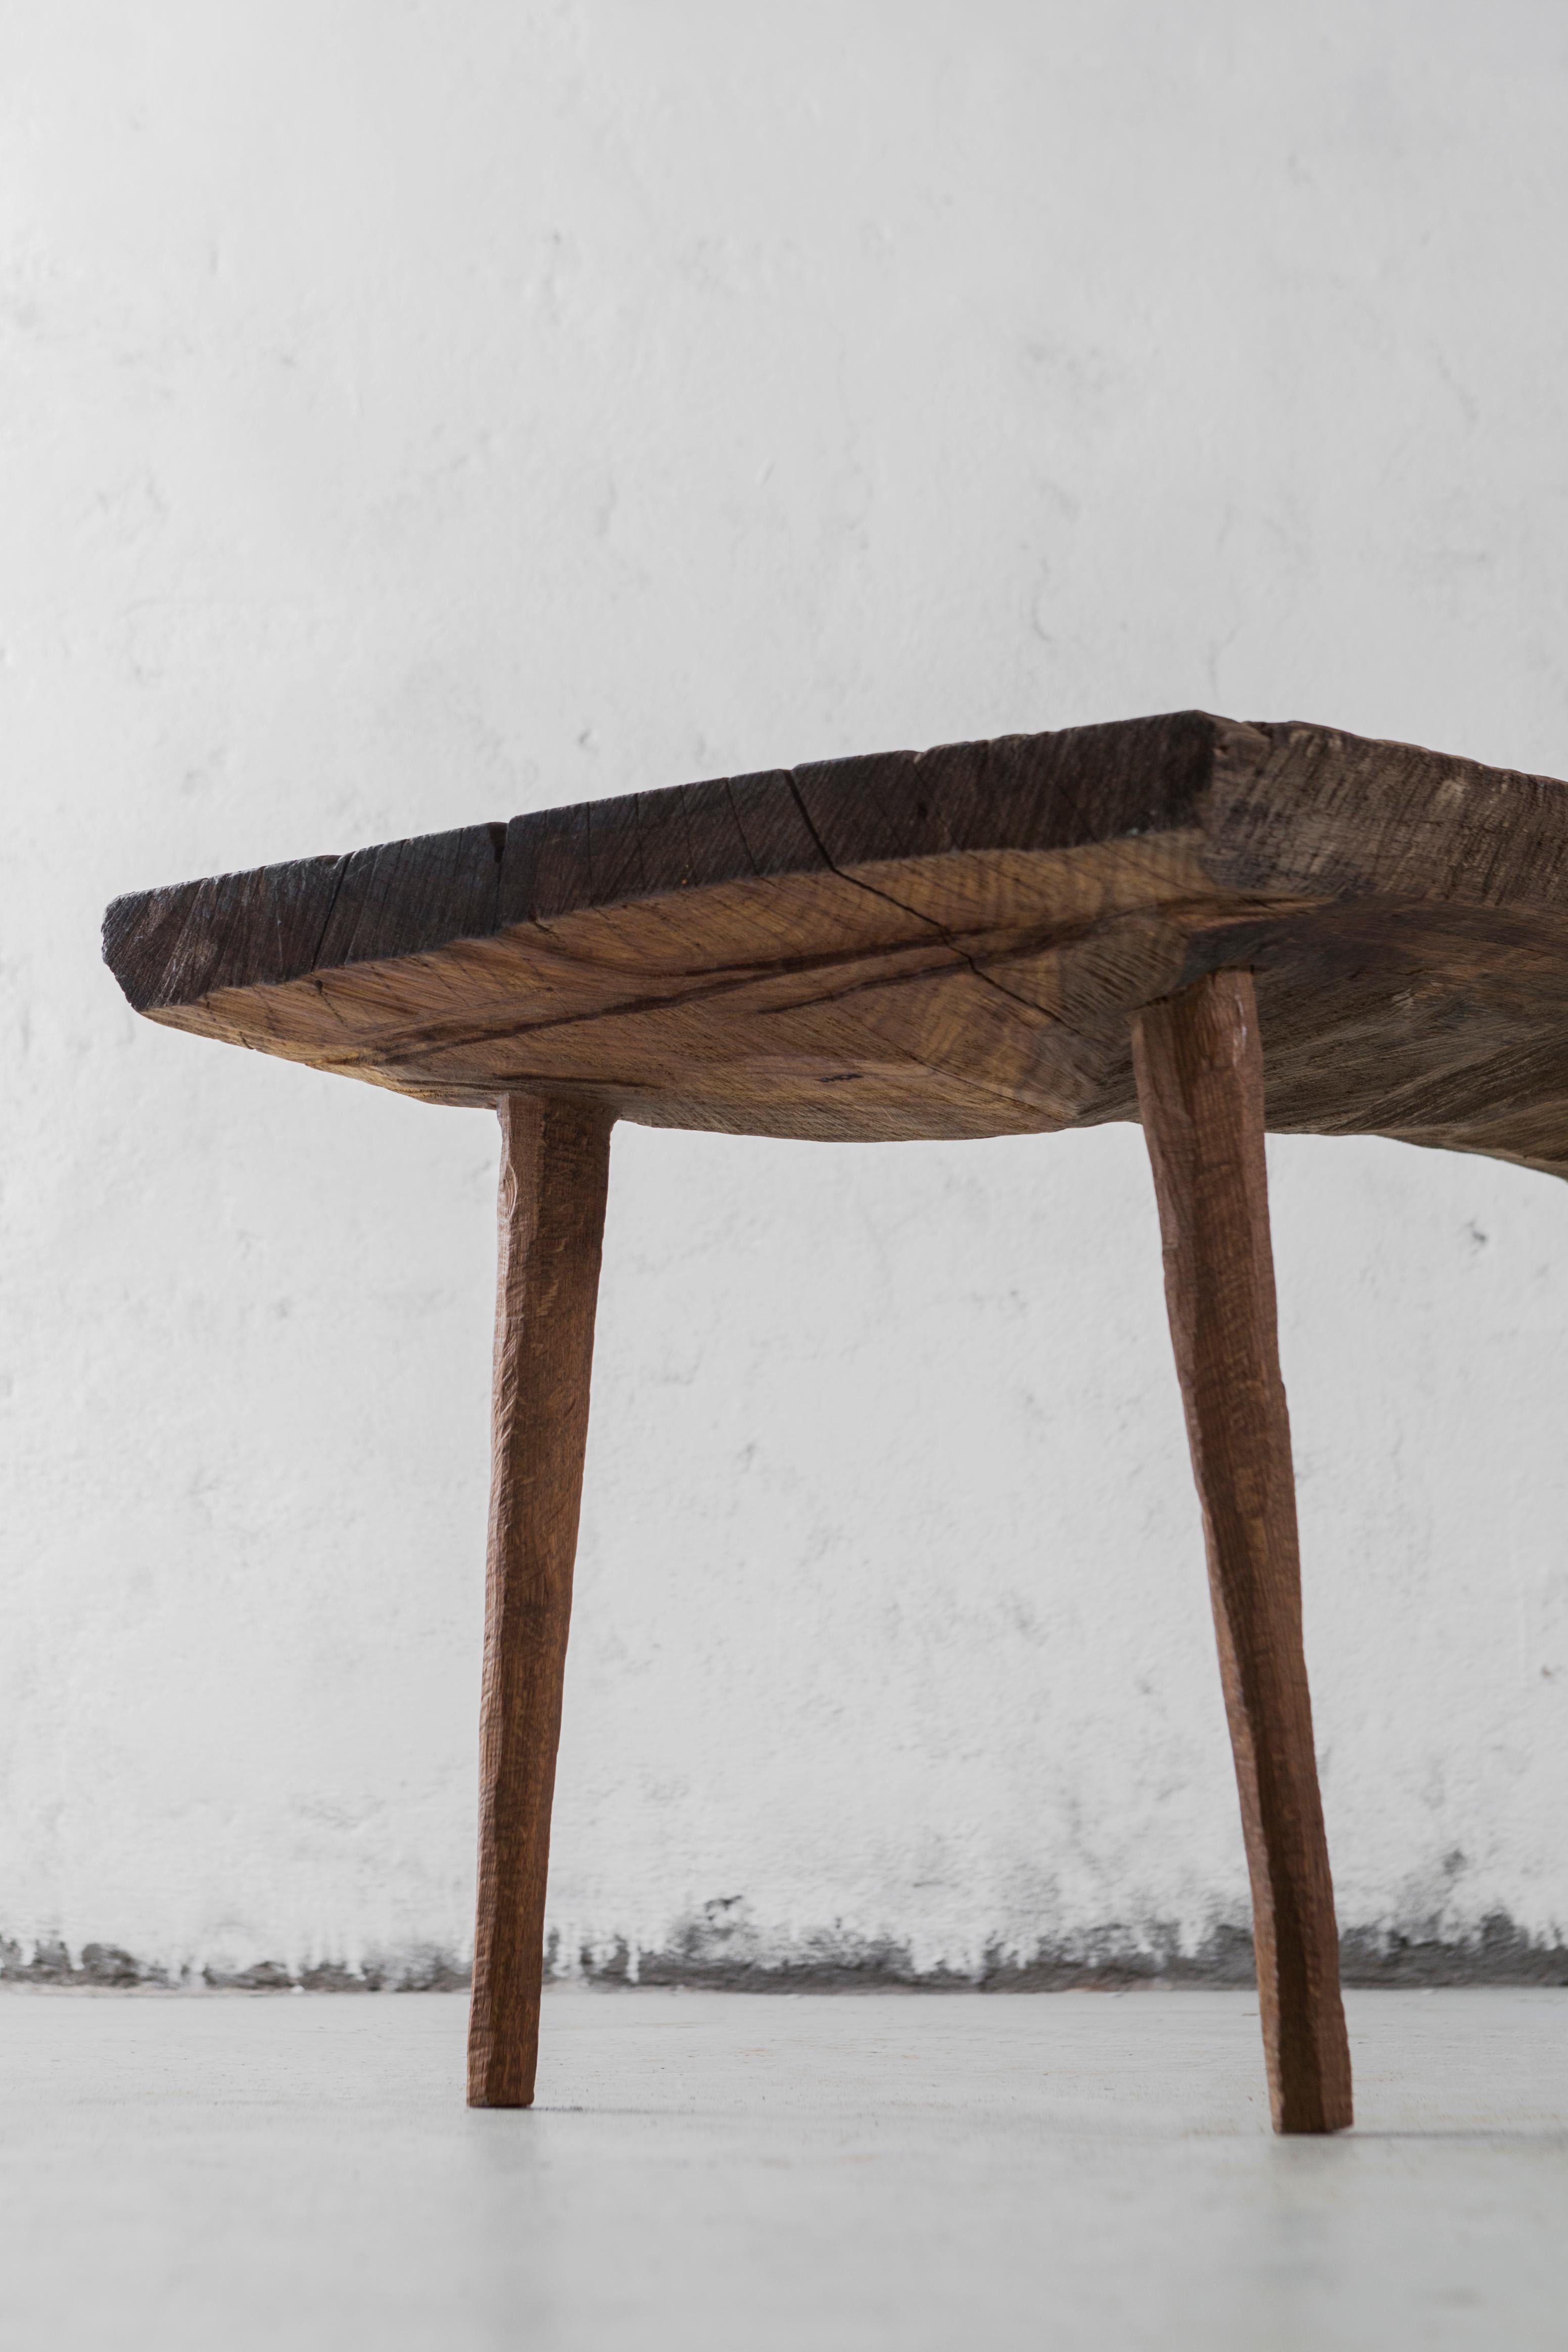 Small table made of solid oak (+ linseed oil)
Measures: 50 x 123 x 45 cm

Warm furnitures made by Russian designers from 